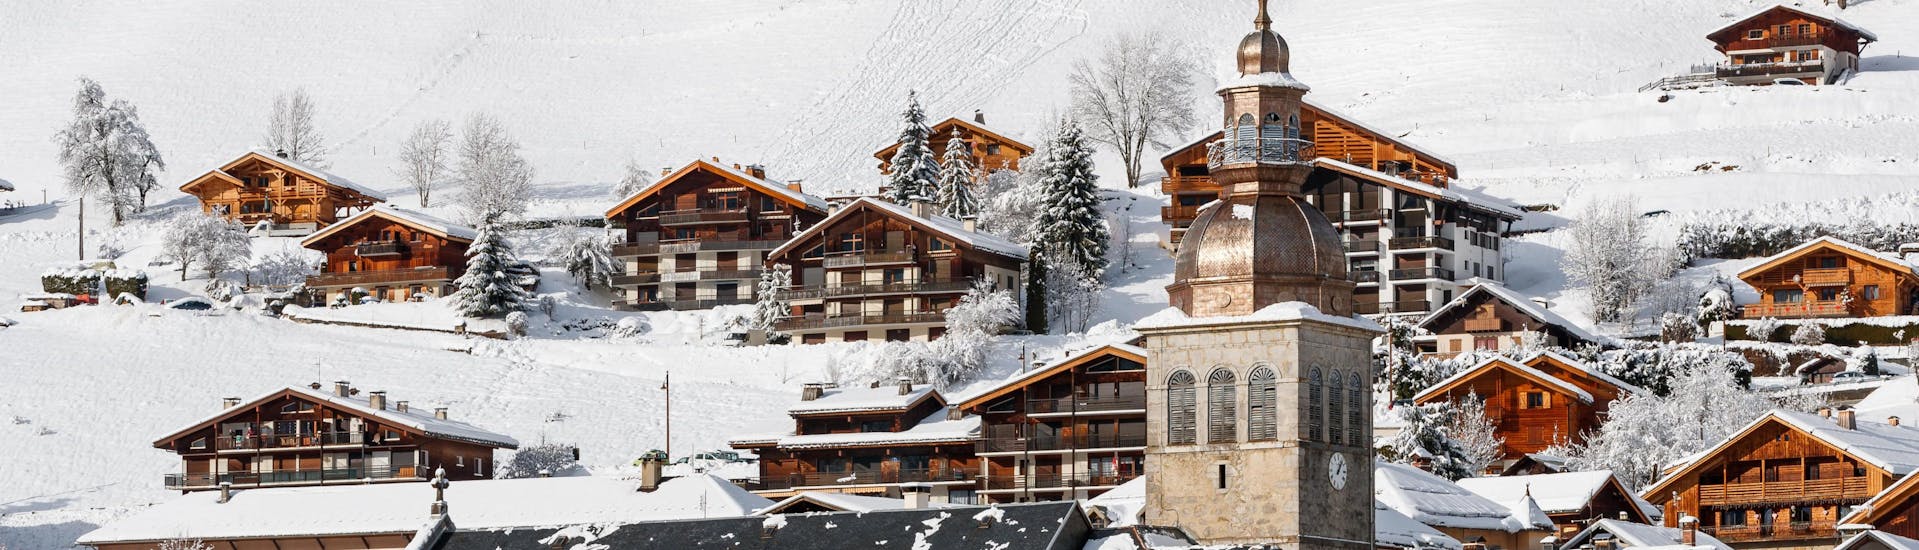 View of the town of the French ski resort of Le Grand Bornand with its church and wooden chalets where local ski schools offer a wide range of ski lessons for those who want to learn to ski.